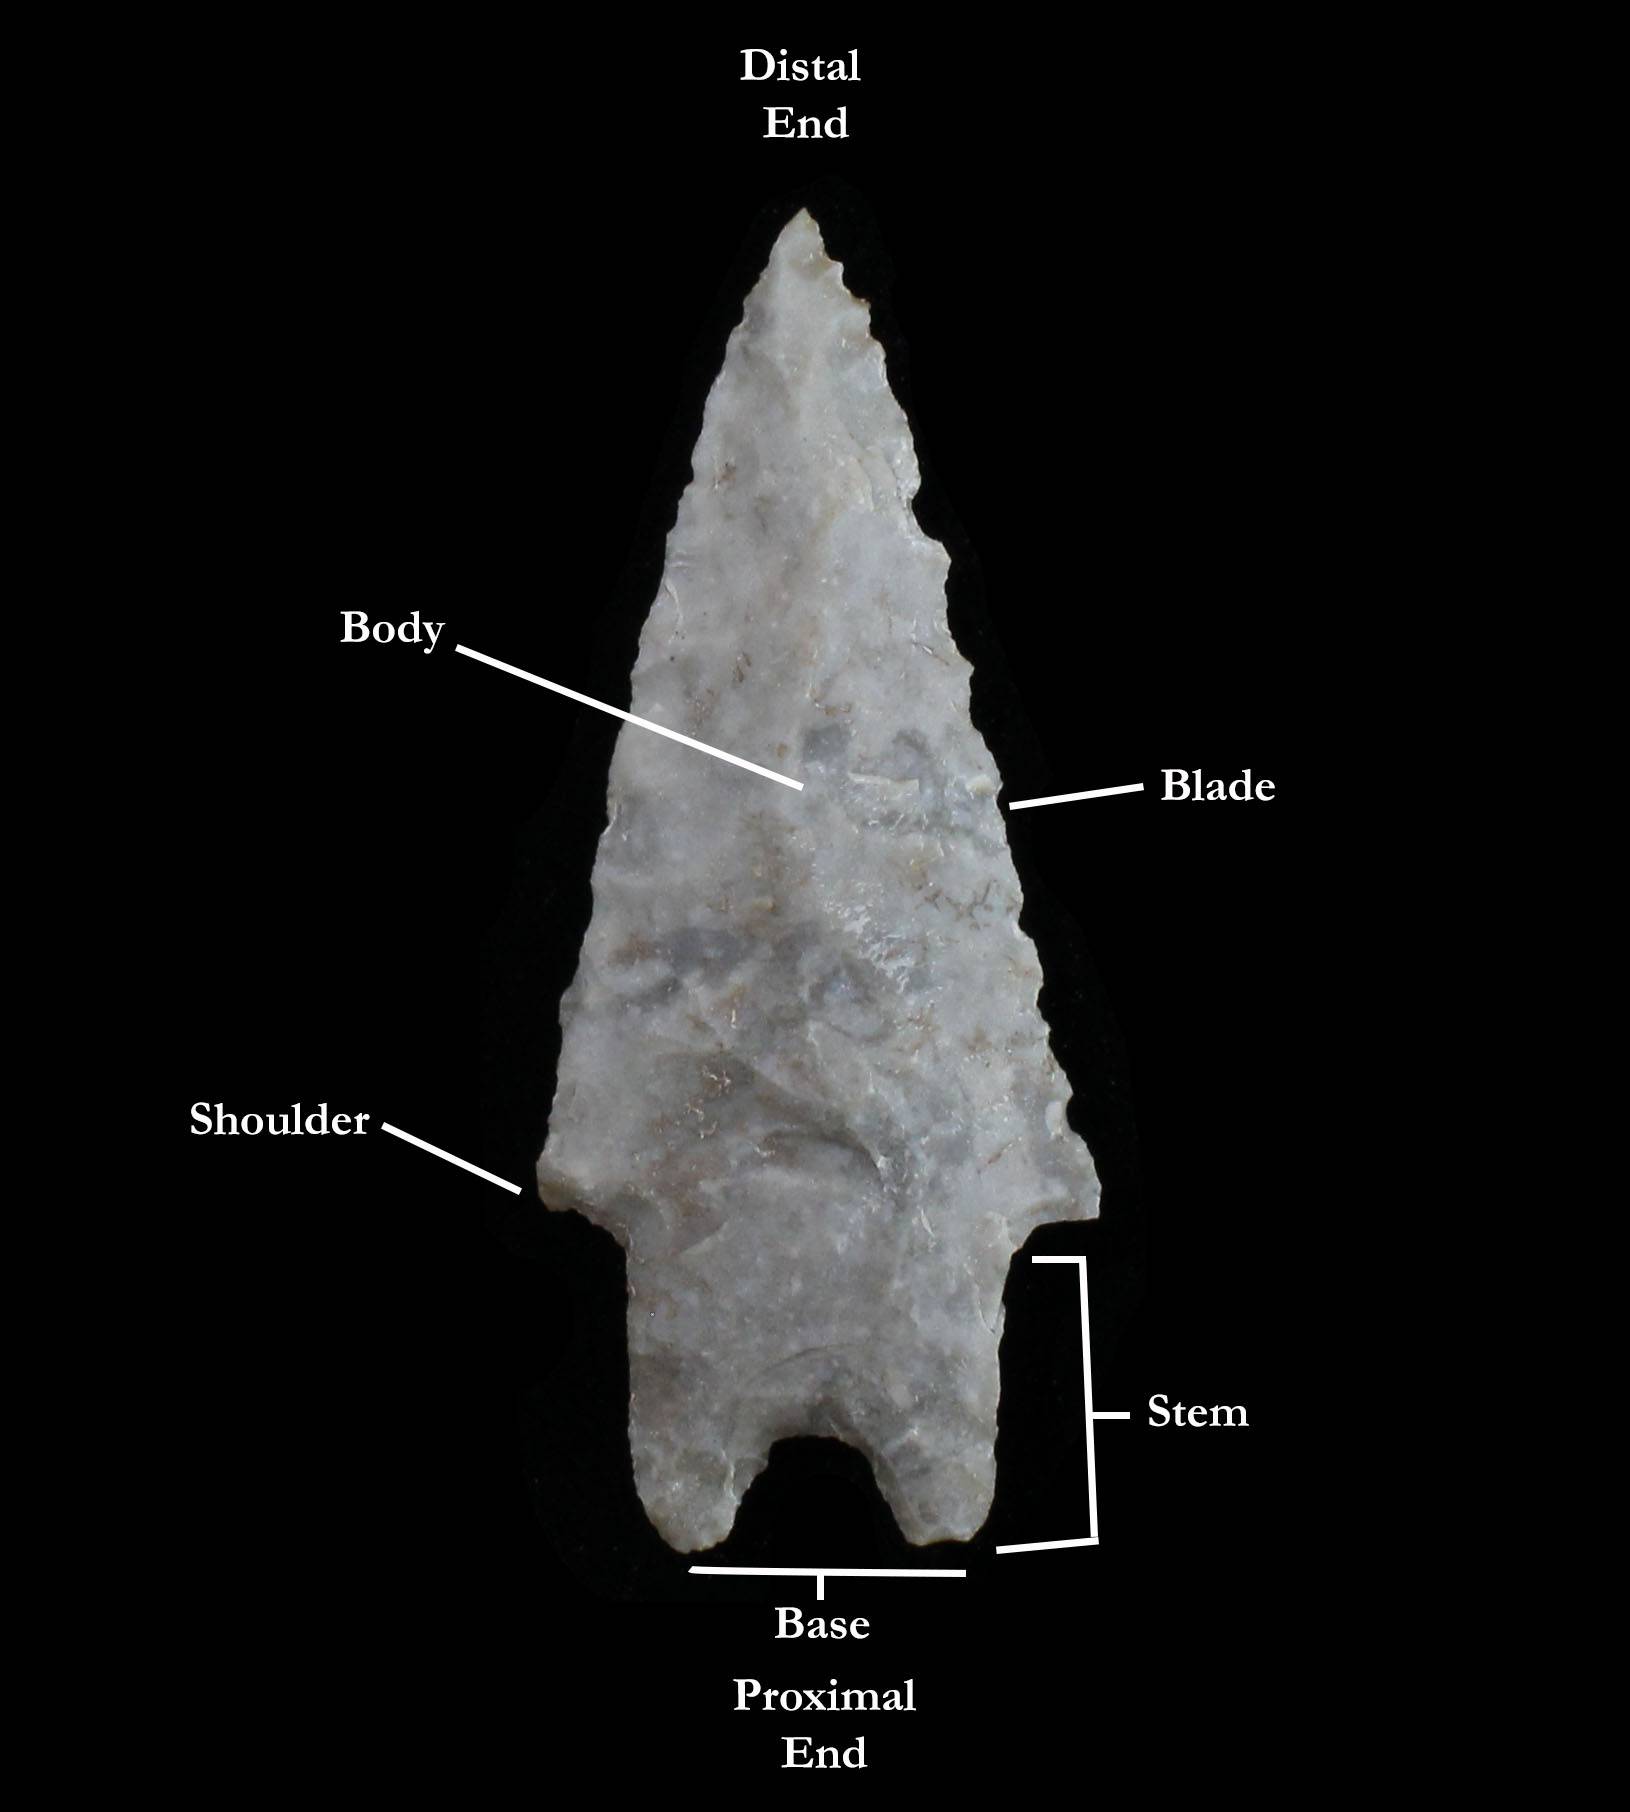 Attributes of a typical projectile point